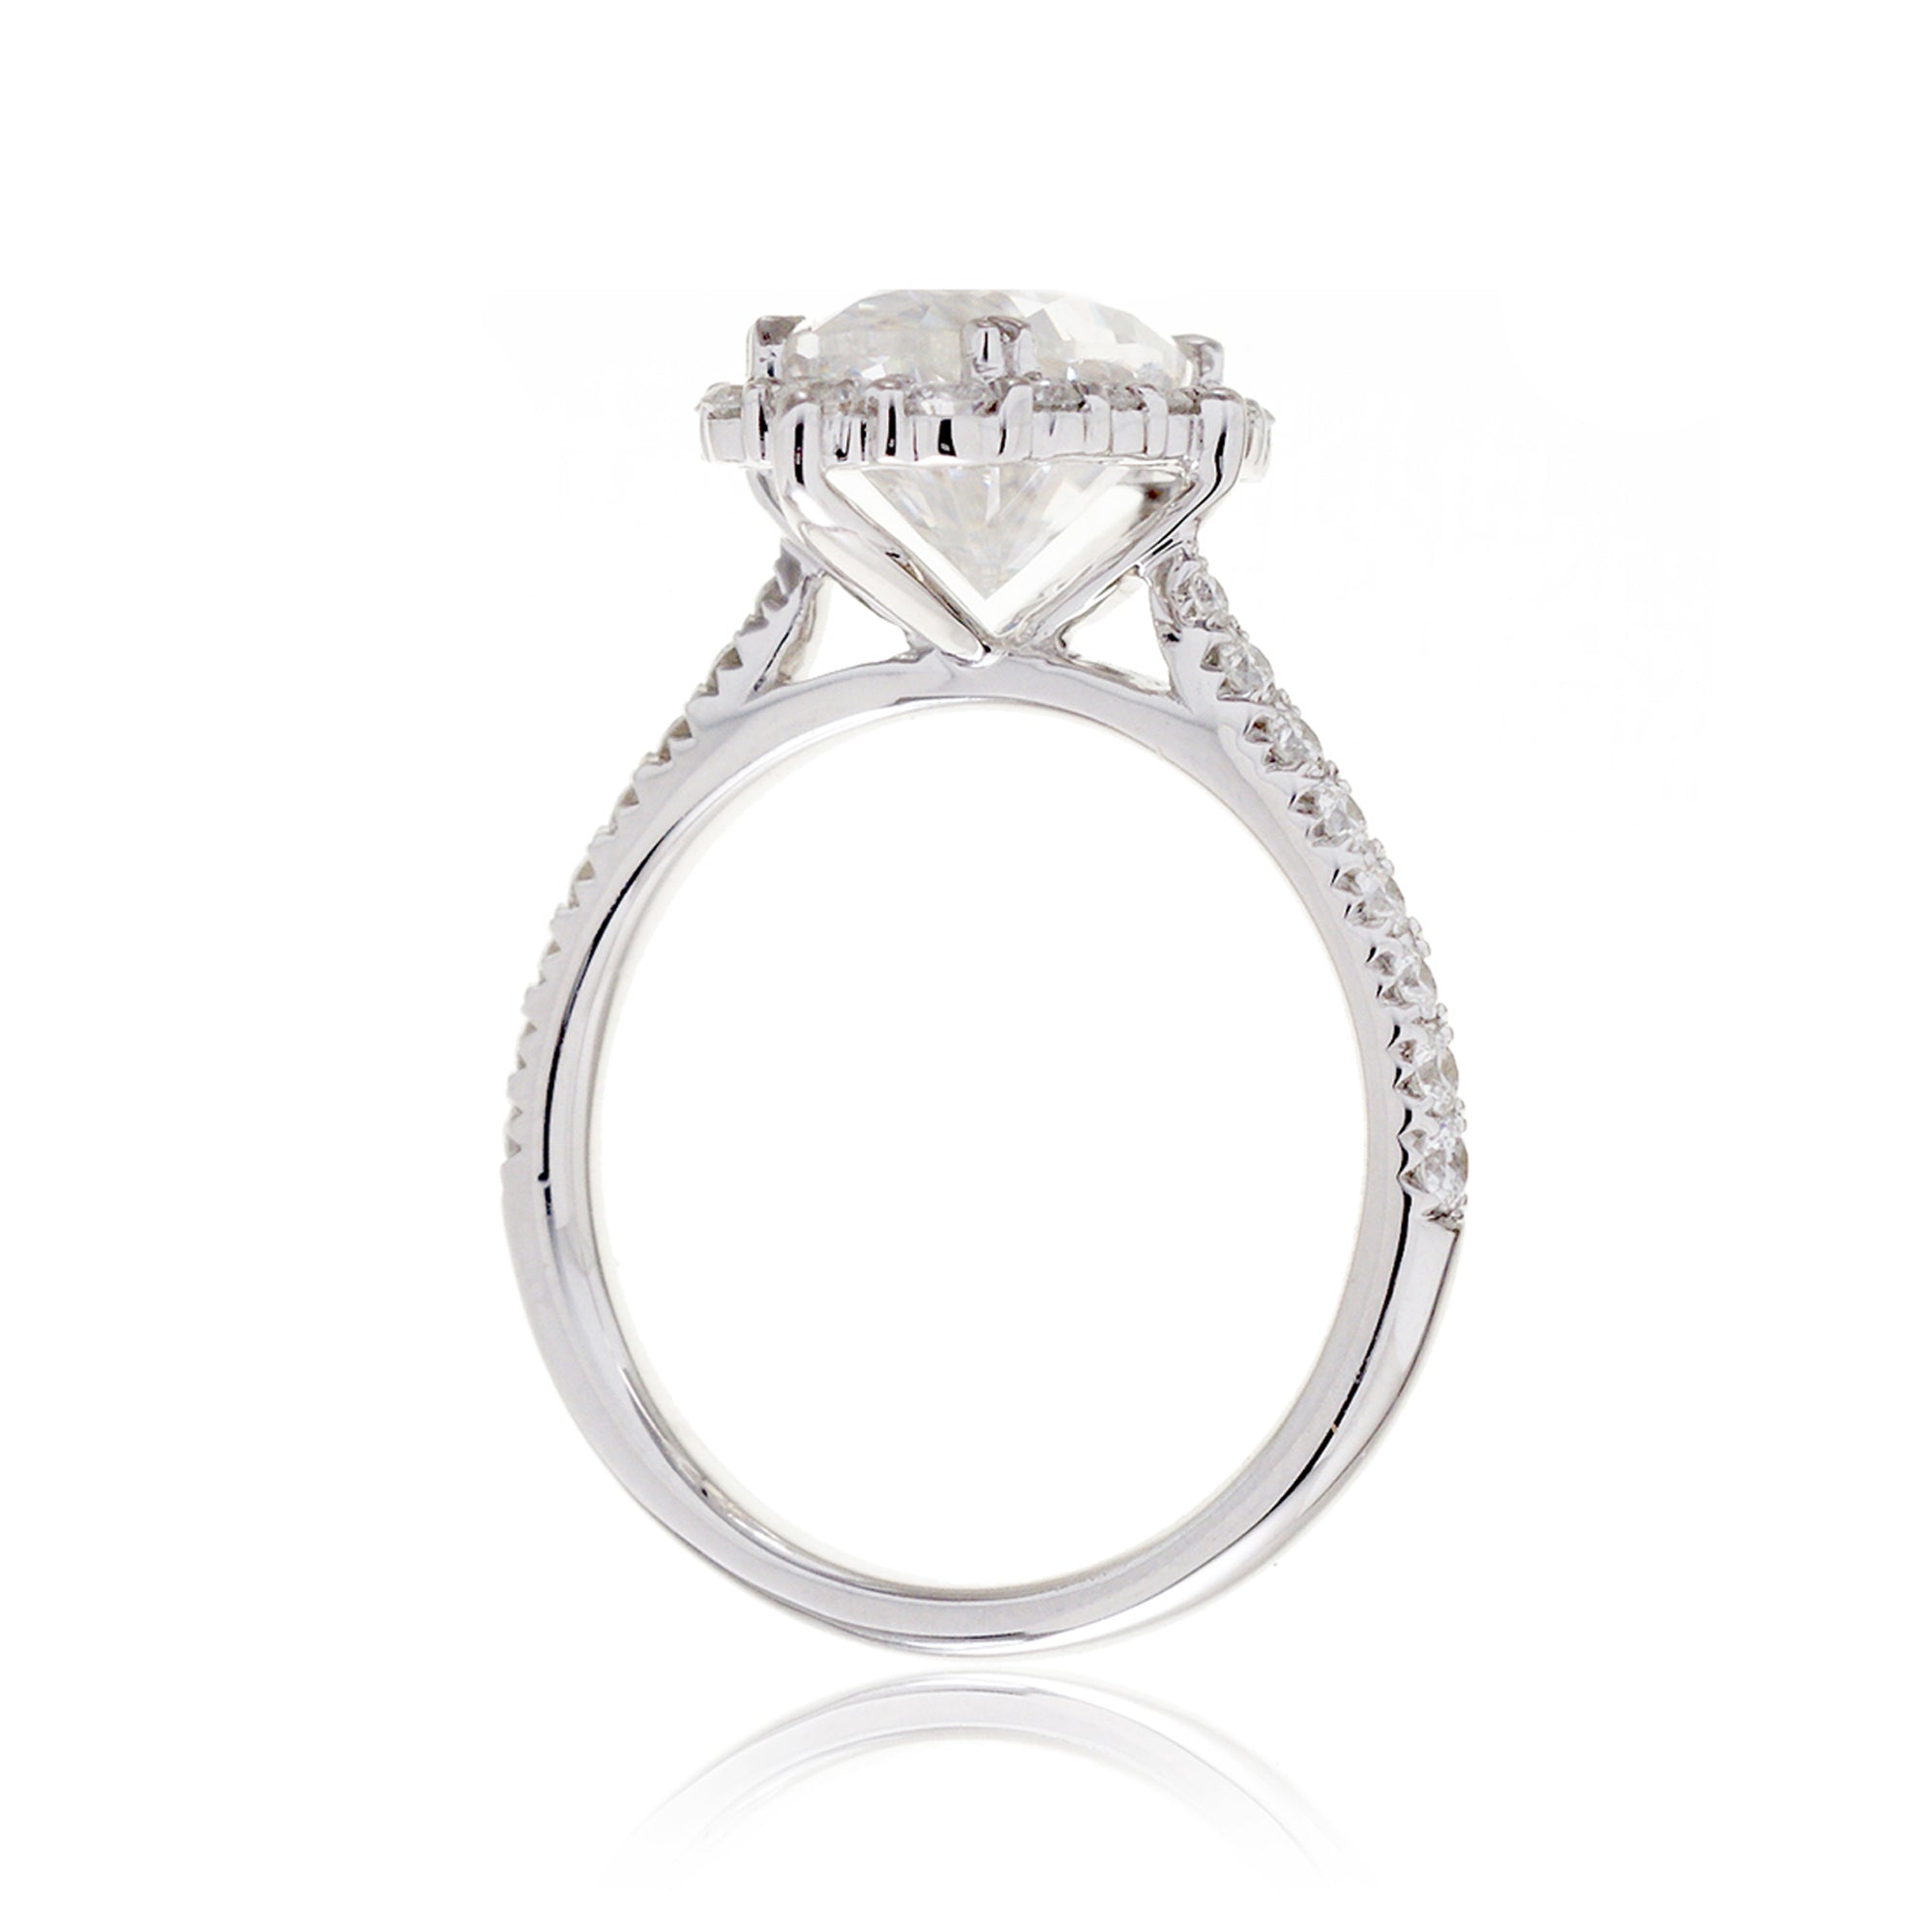 Oval diamond ring with halo and cathedral setting in white gold